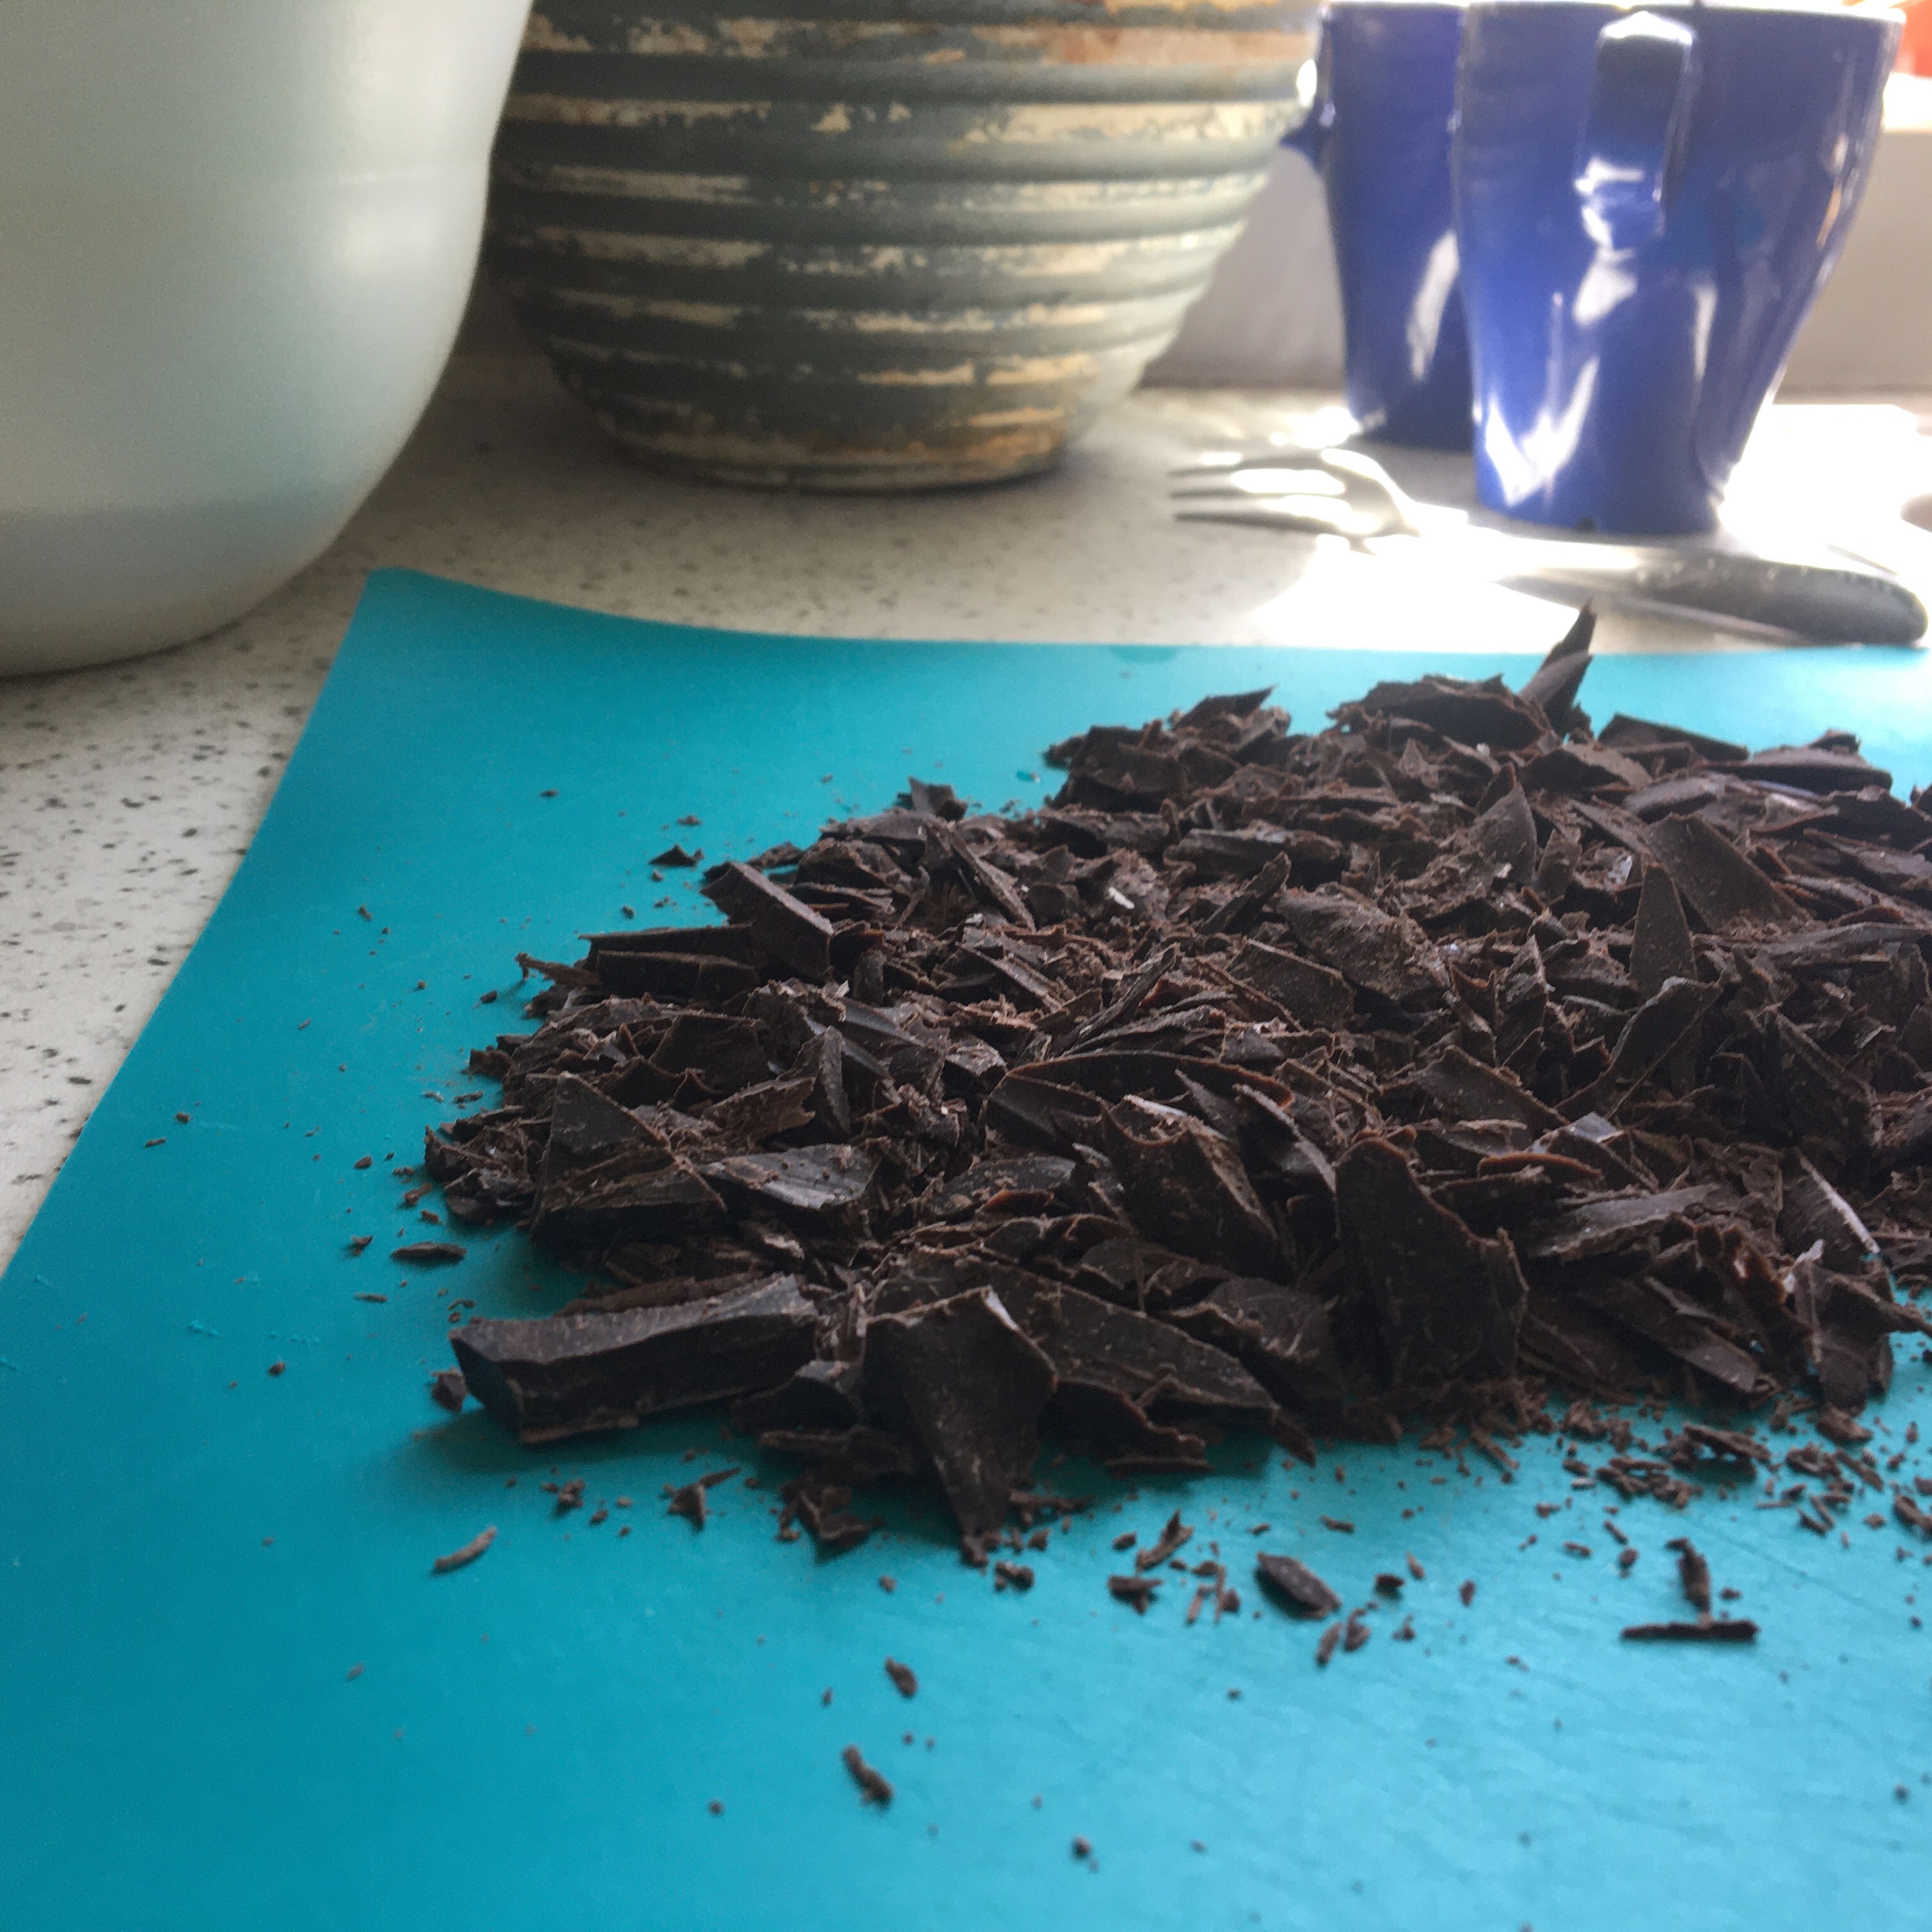 Chop the chocolate bar into chunks and set aside. Finely grate/shred the coconut piece with a zester or microplane. The store-bought shredded coconut could be easily replaced here. 